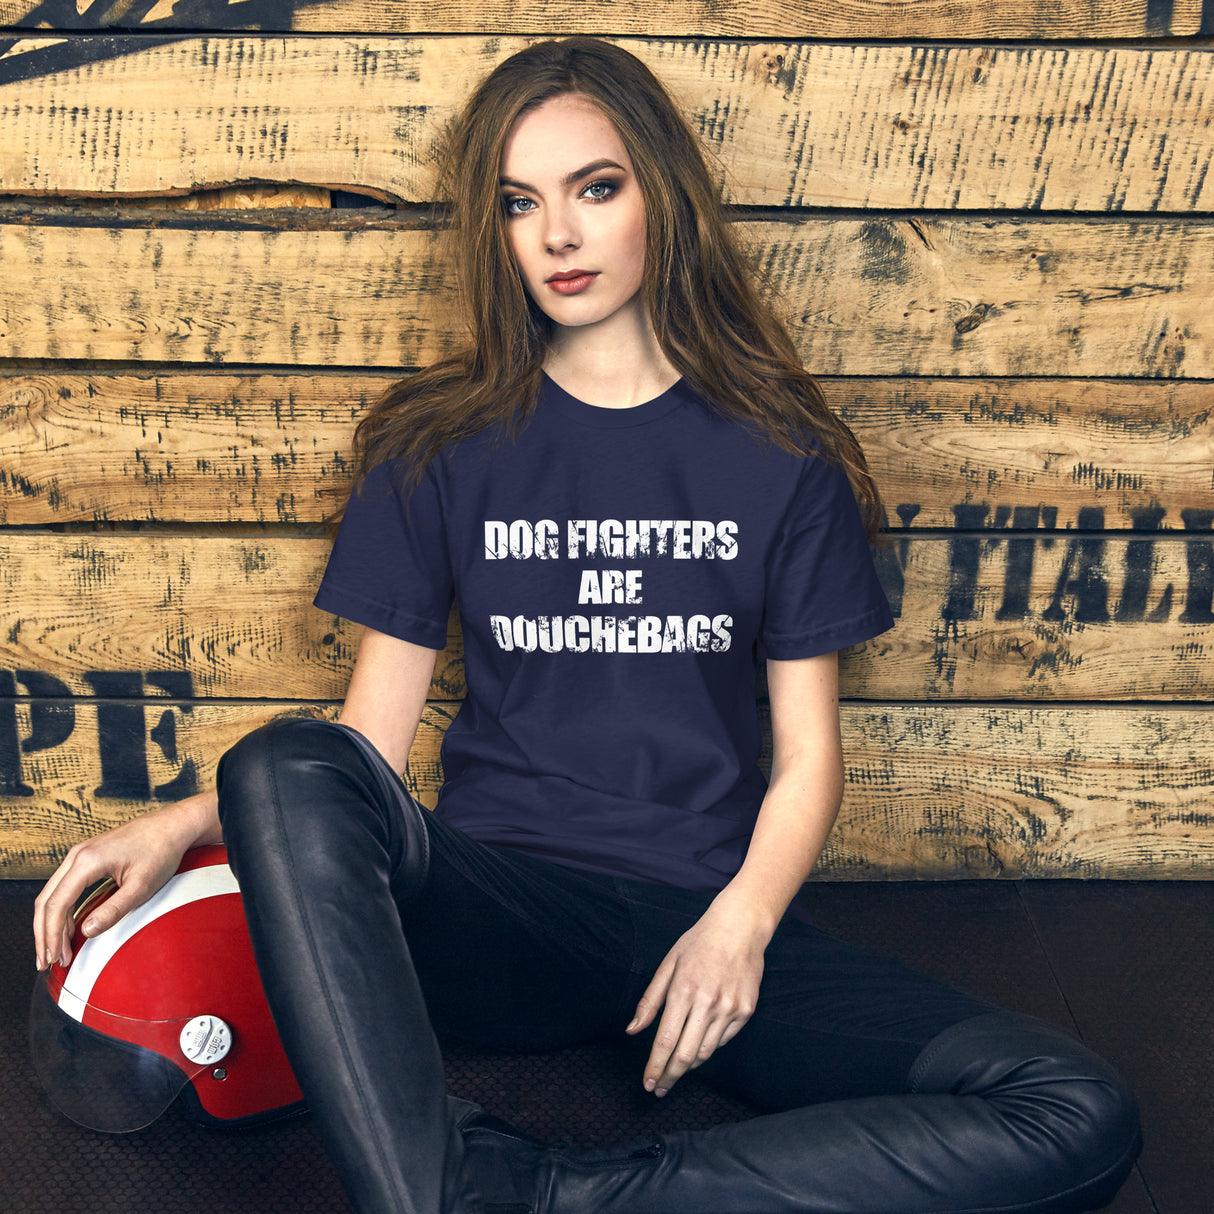 Dog Fighters Are Douchebags Women's Shirt